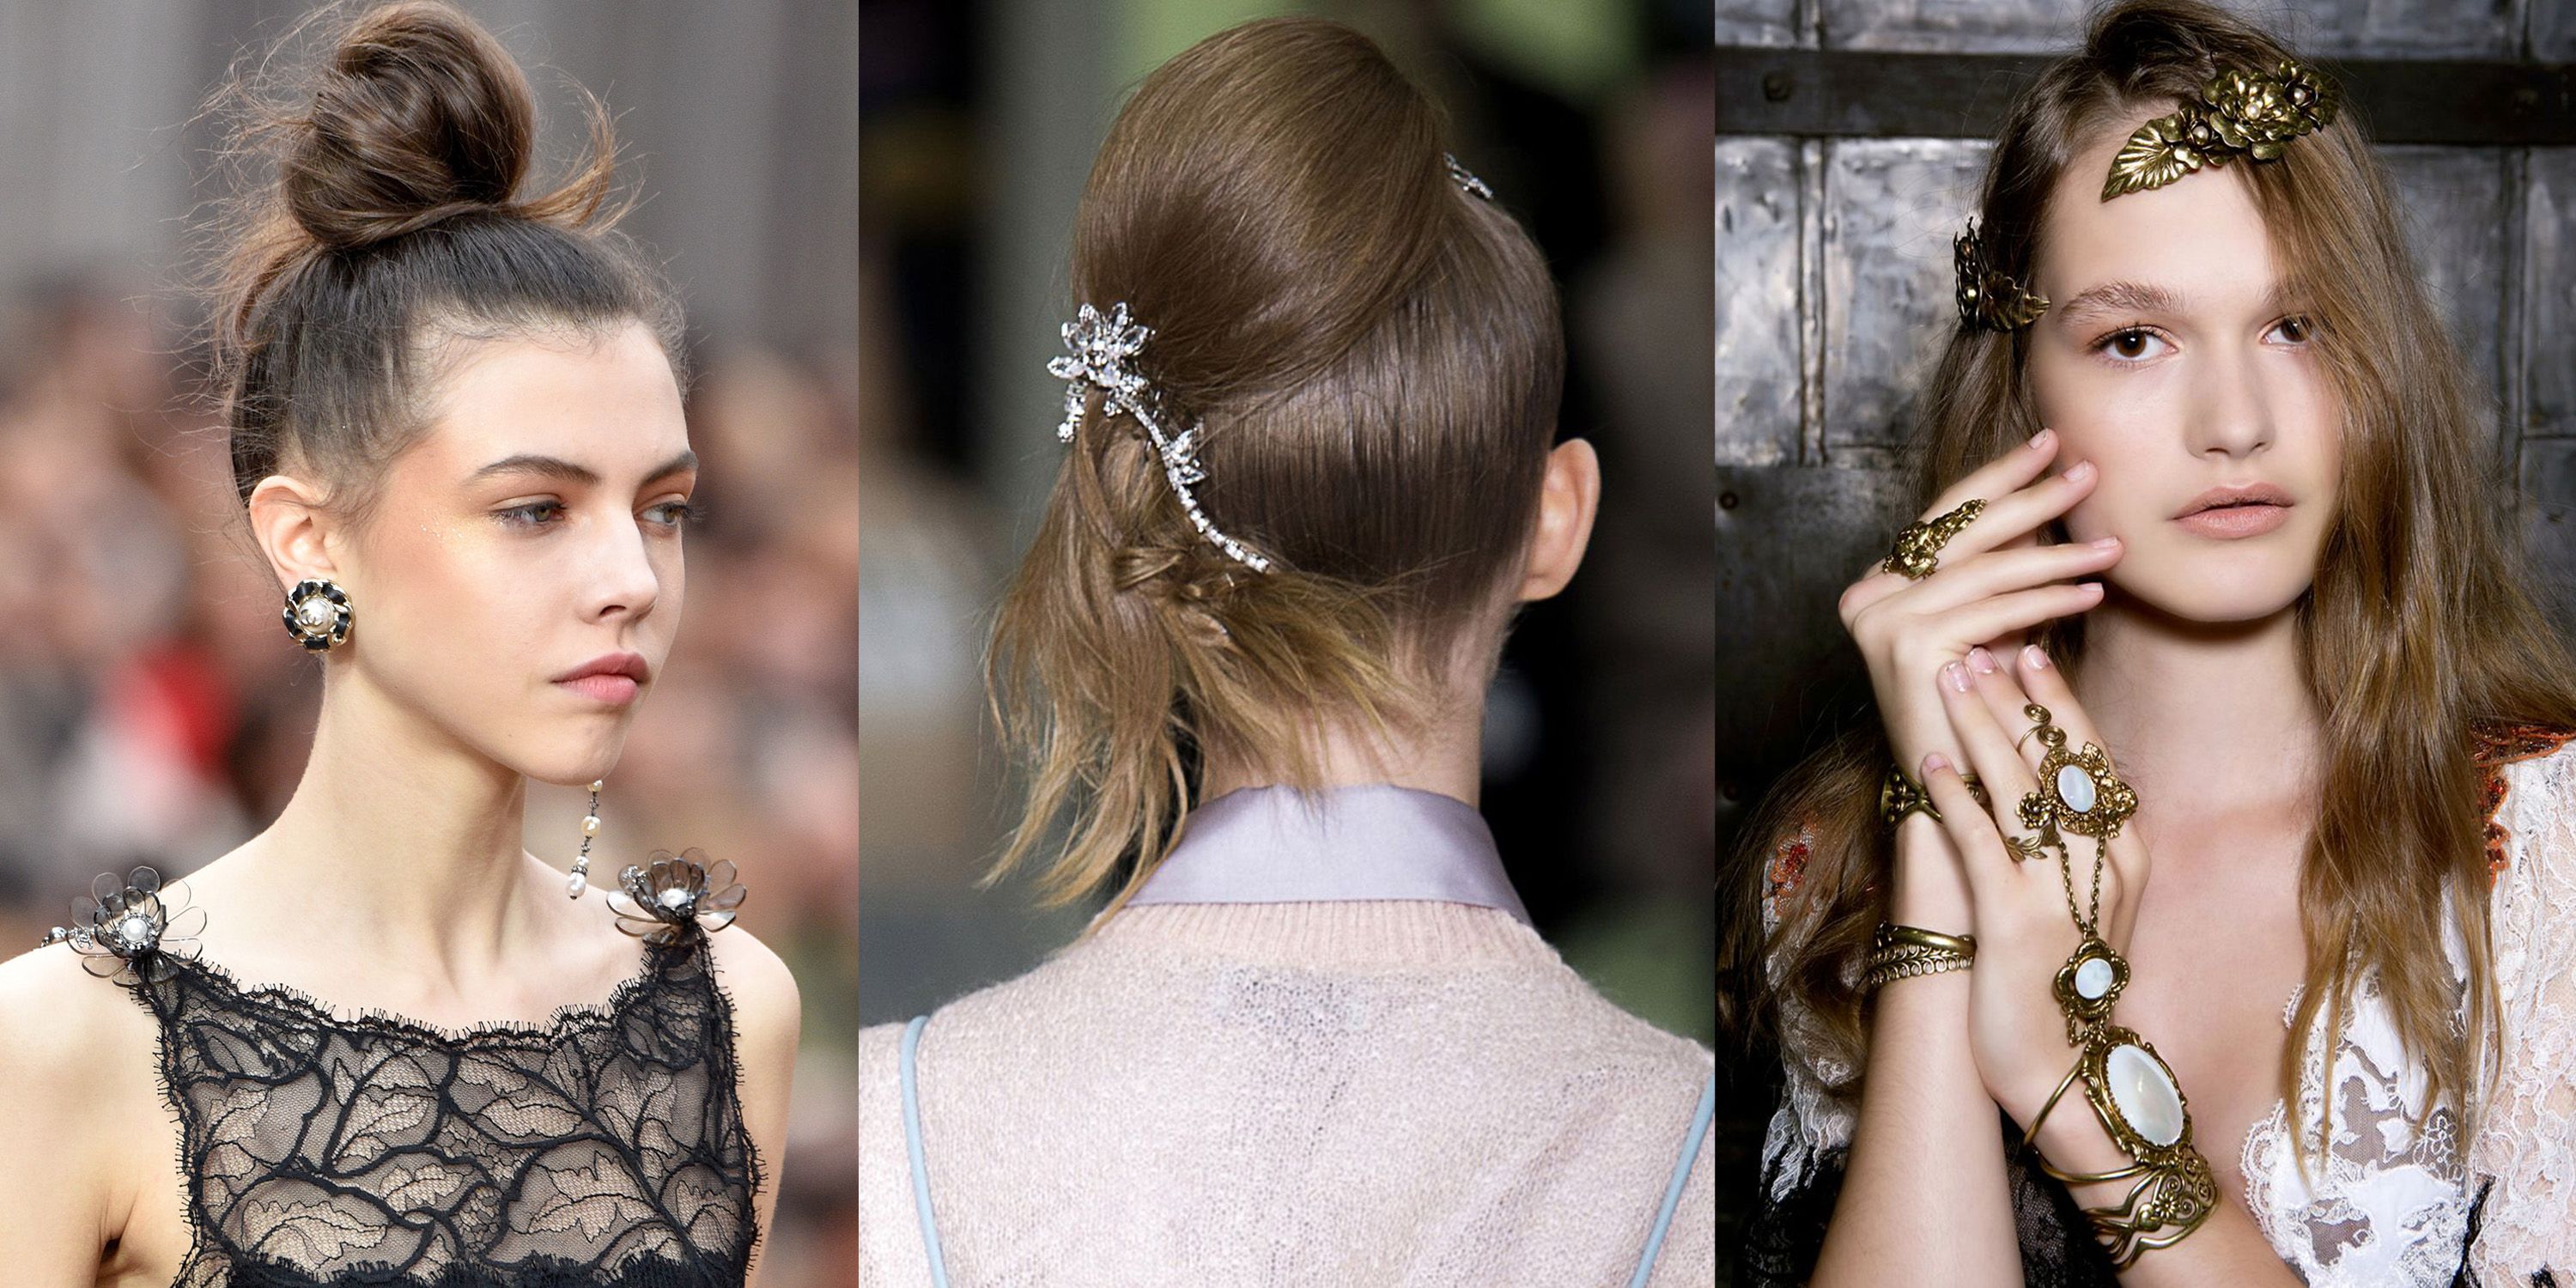 34 Wedding Hairstyles for Brides With Long Hair